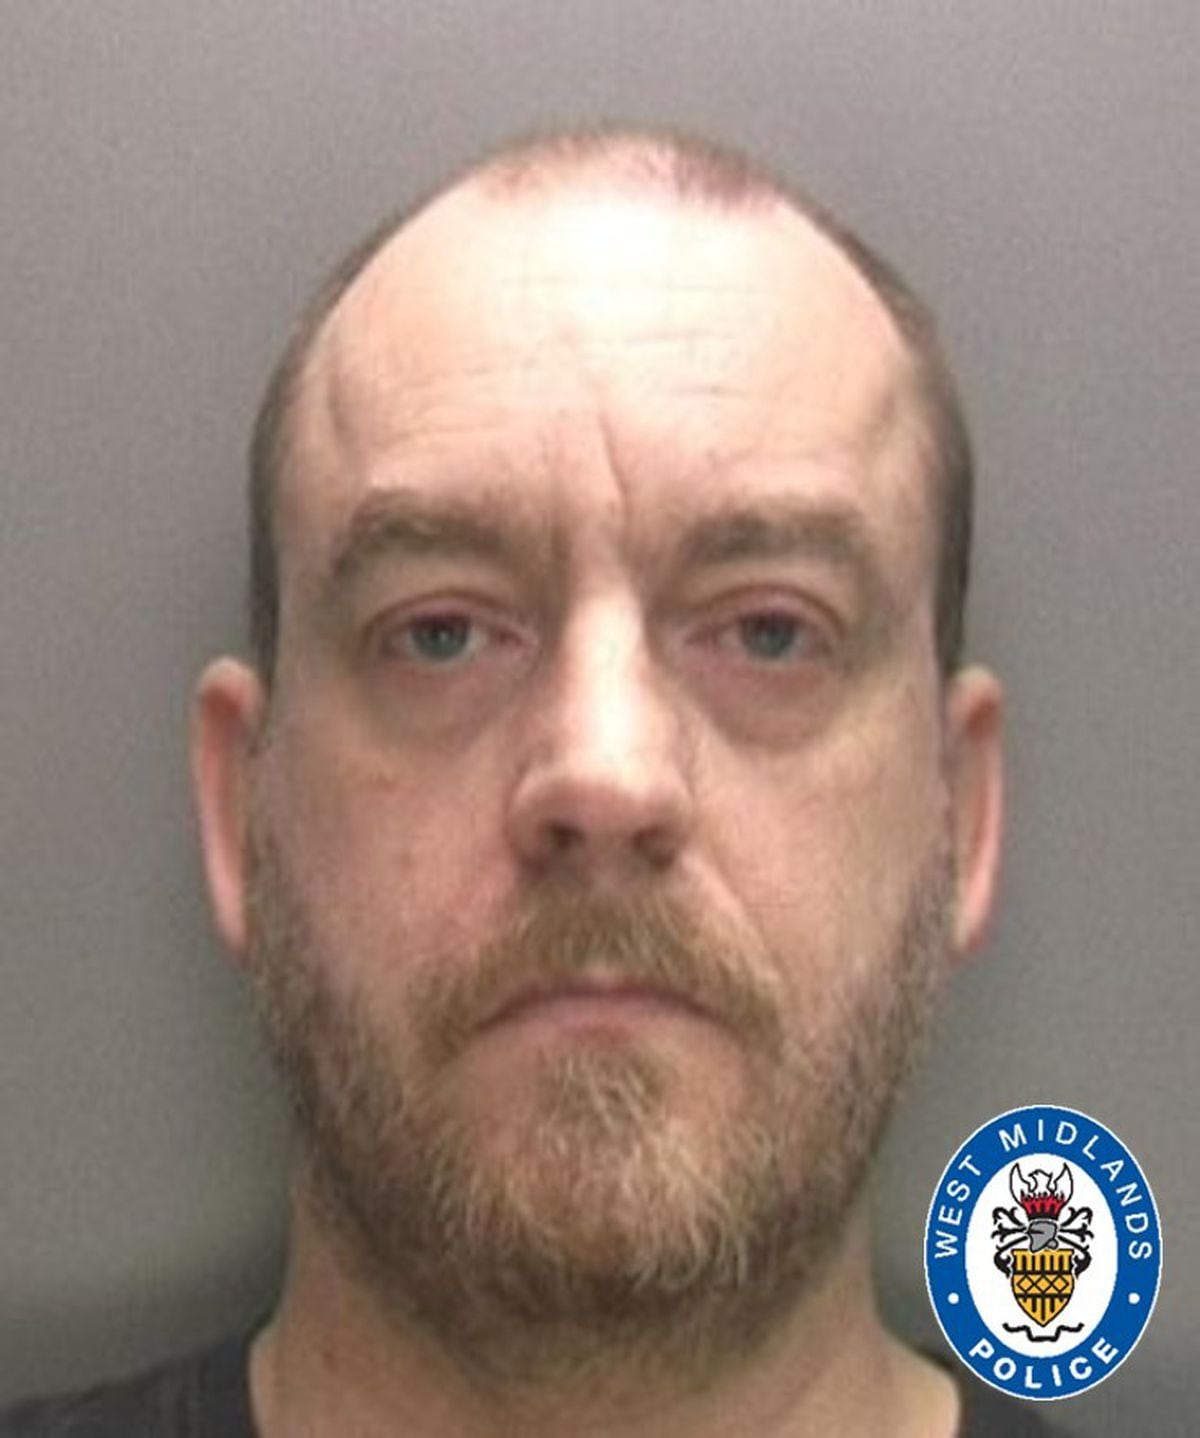 Martyn Smith was jailed for nine years. Photo: West Midlands Police/PA